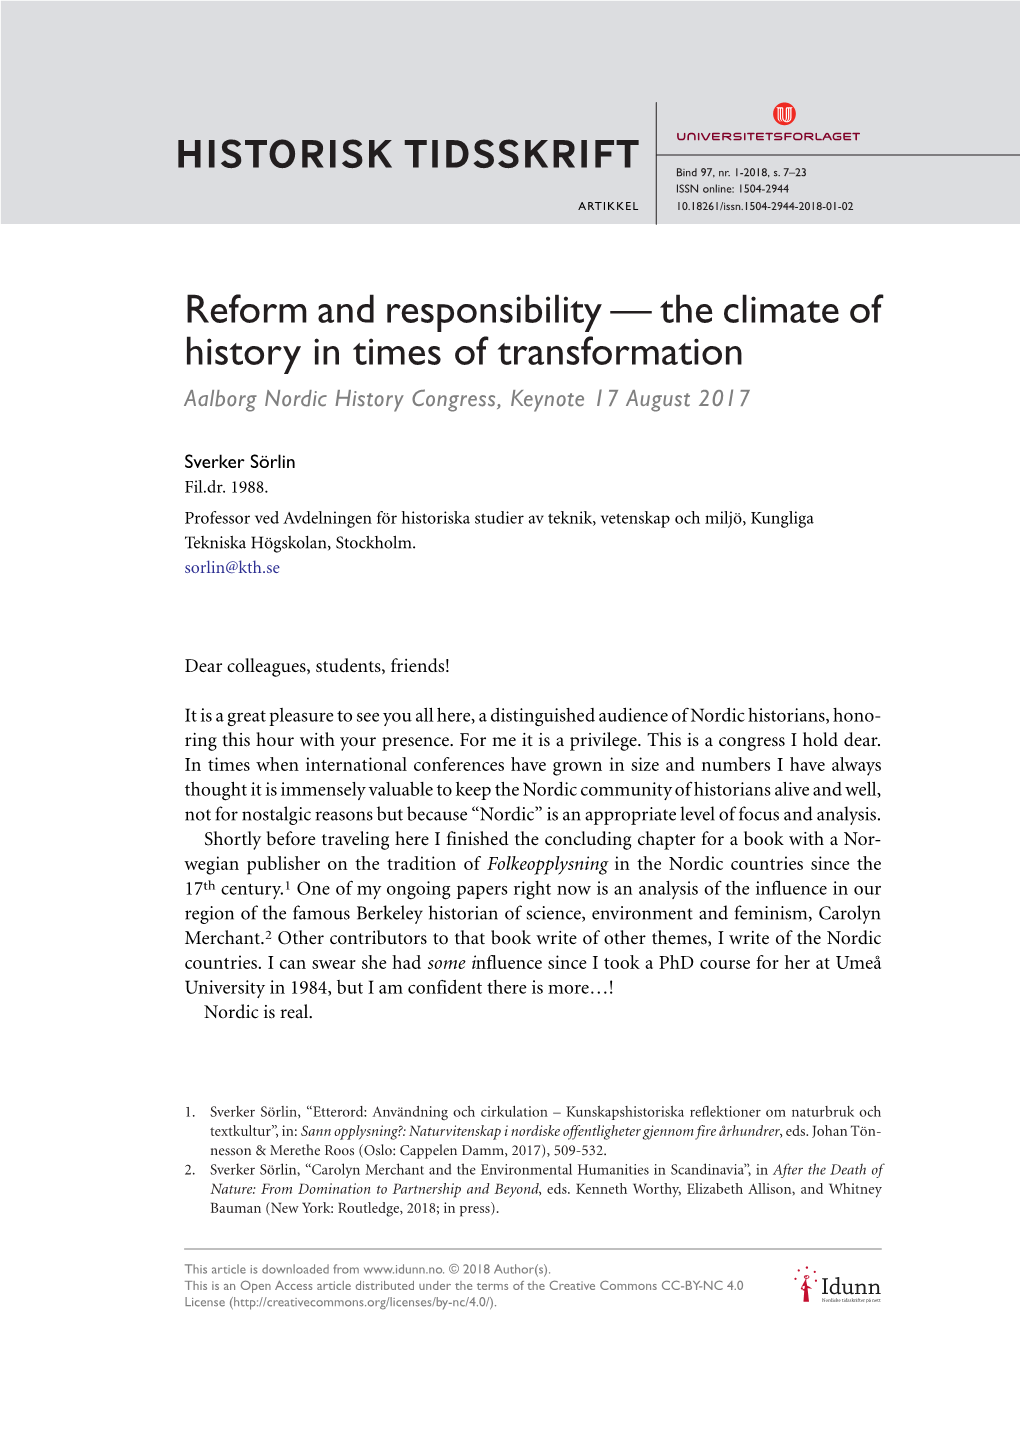 Reform and Responsibility — the Climate of History in Times of Transformation Aalborg Nordic History Congress, Keynote 17 August 2017